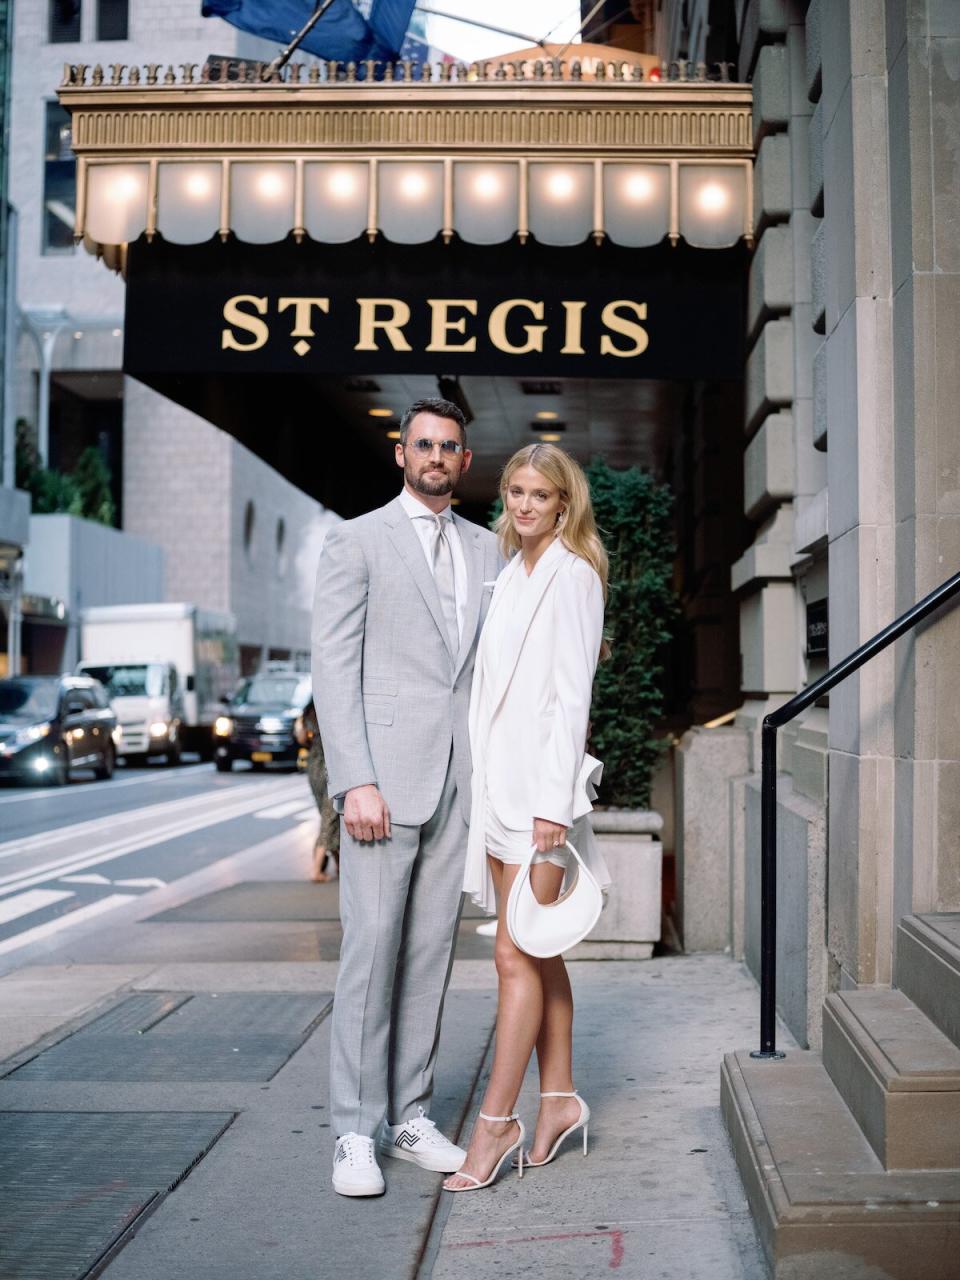 DSCF6054-Kate-and-Kevin-enjoying-some-time-at-the-St.-Regis-before-their-rehearsal-dinner-at-The-Polo-Bar.-The-St.-Regis-is-where-they-had-their-first-date